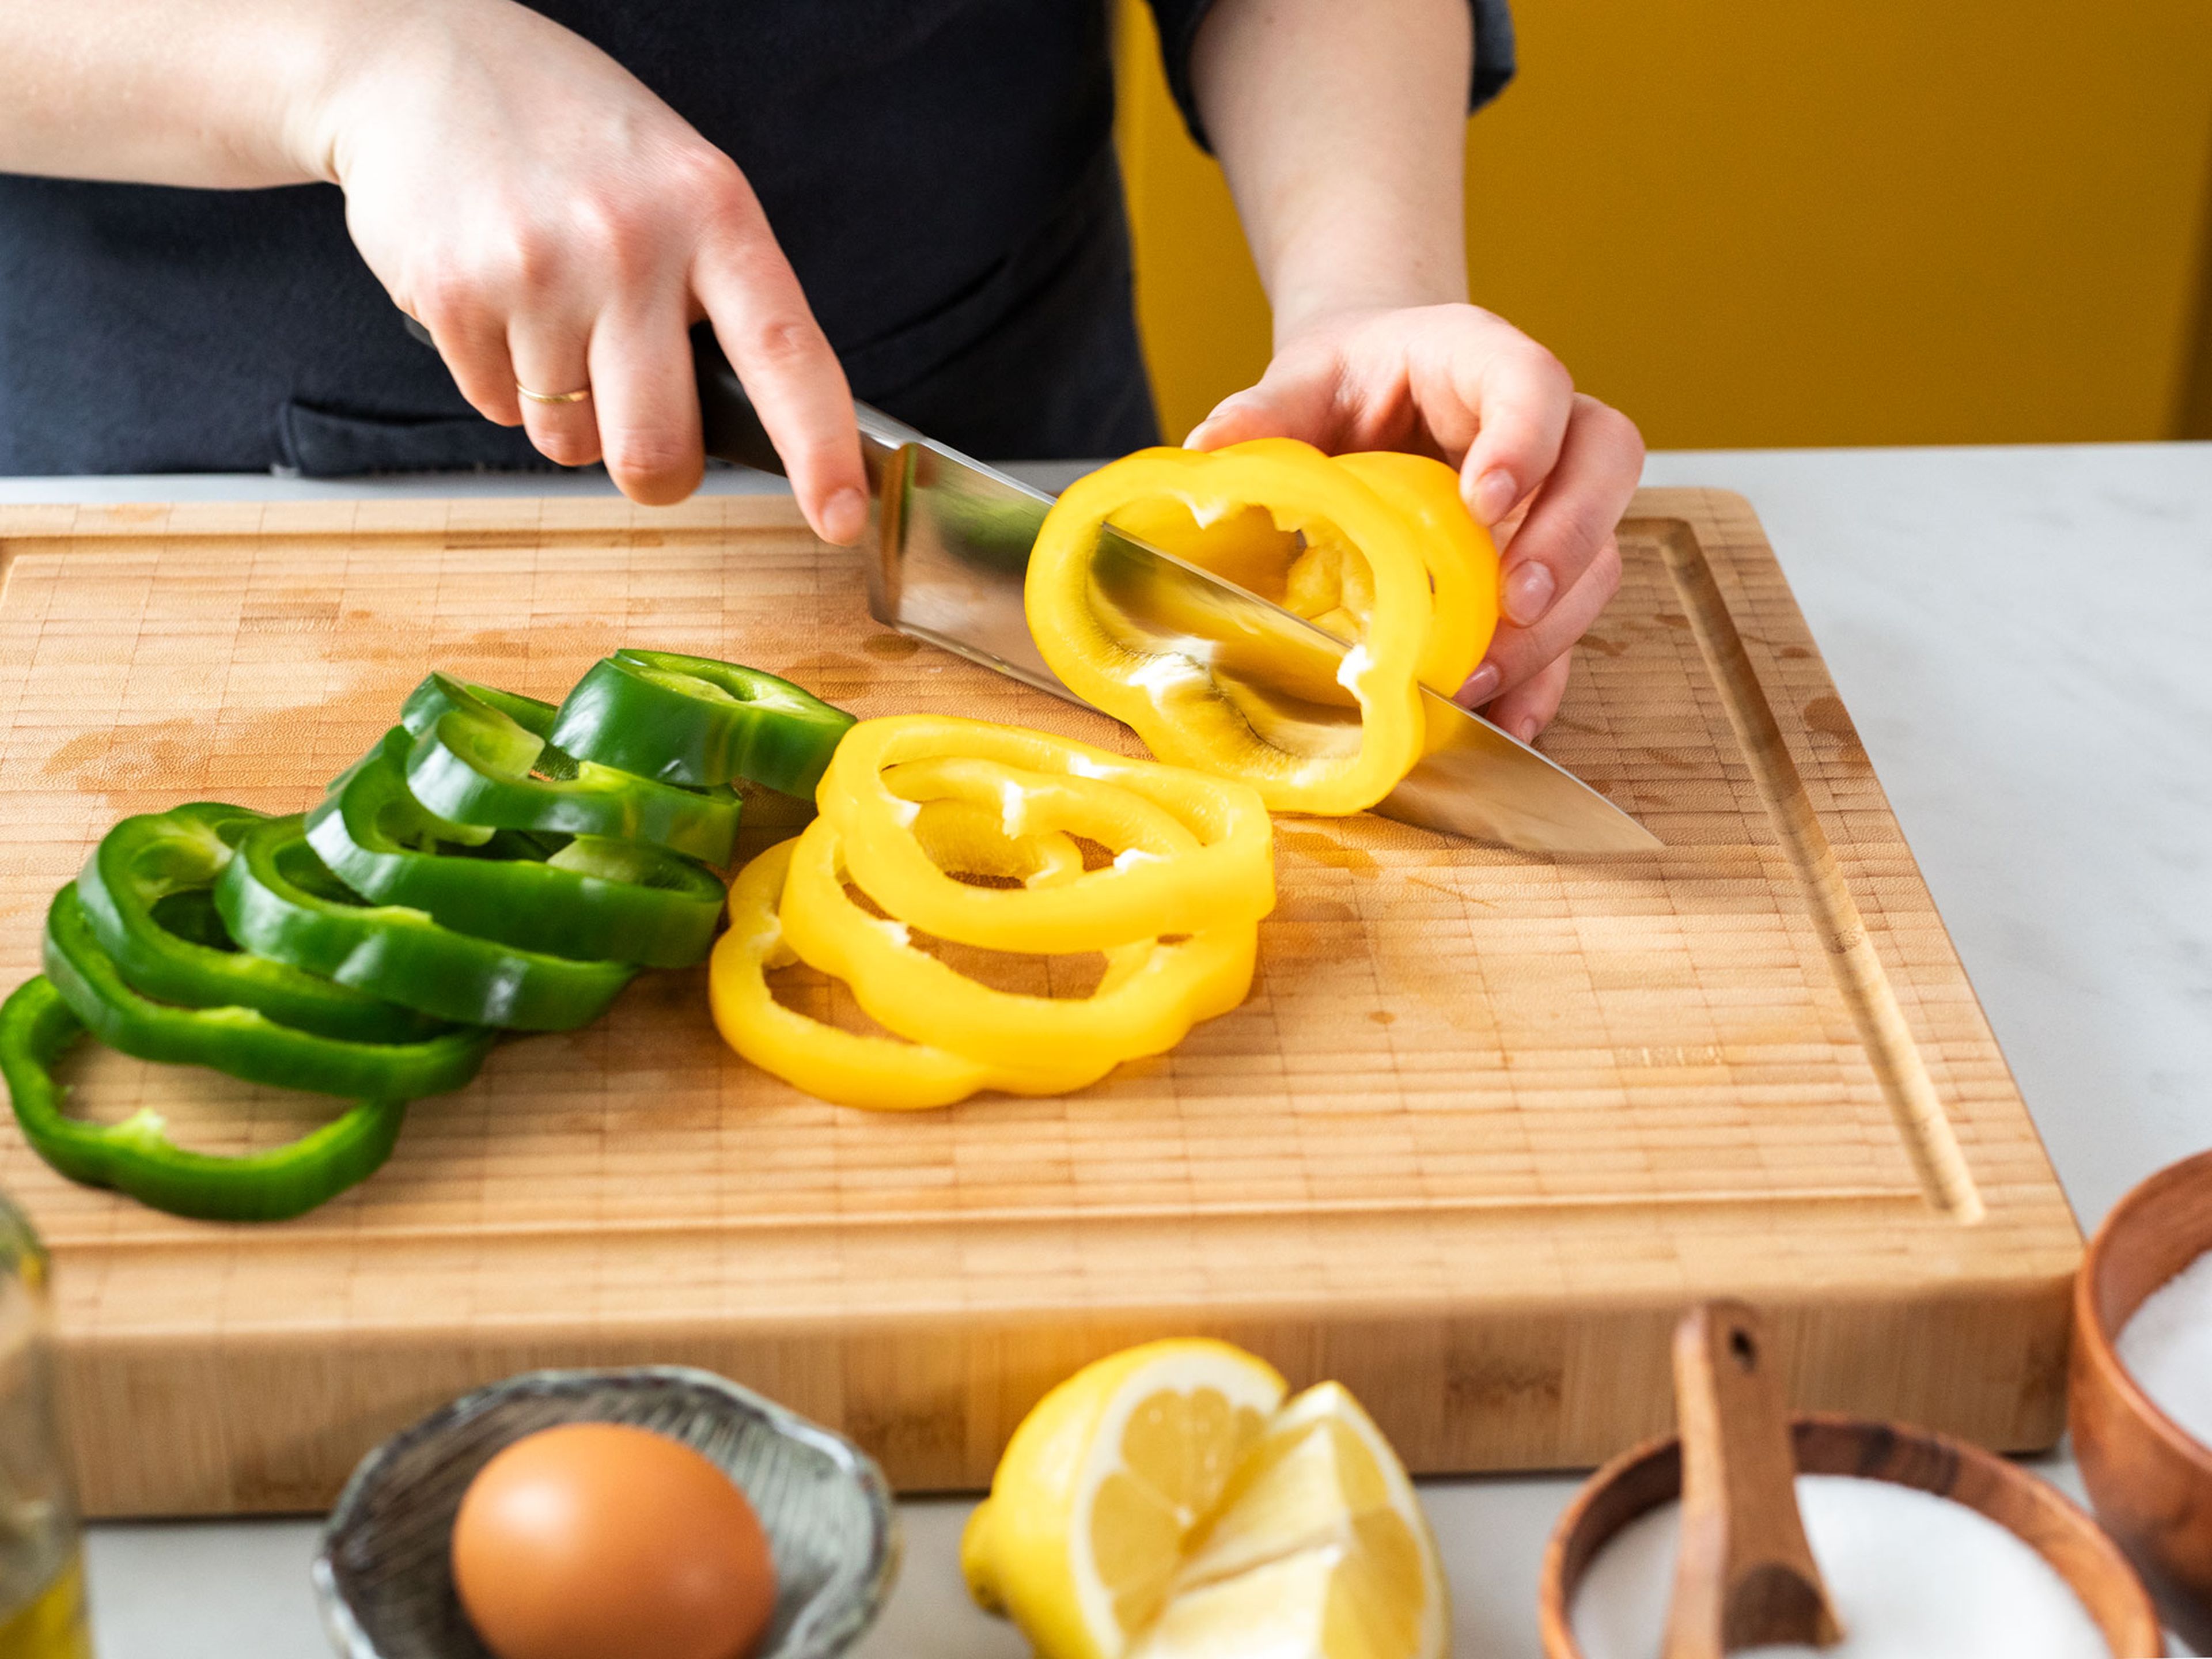 Preheat the oven to 220°C/430°F. Trim the ends of the bell peppers and remove the seeds. Slice into rings approx. 0.5cm – 1cm / 0.25 in thick.